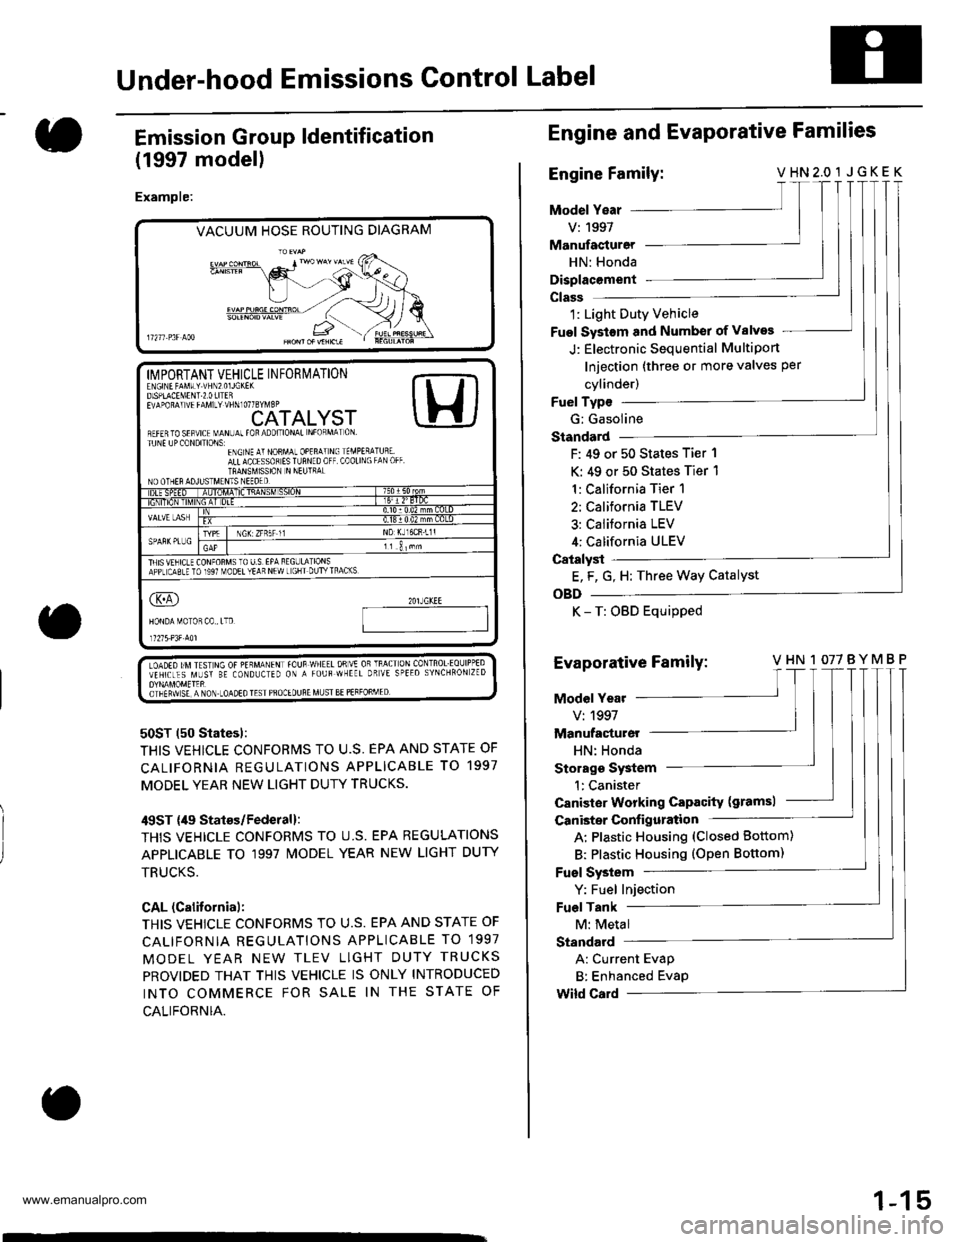 HONDA CR-V 1999 RD1-RD3 / 1.G Workshop Manual 
Under-hood Emissions Control Label
Emission Group ldentification
(1997 modell
Example:
VACUUM HOSE ROUTING DIAGRAM
LOADED IM TEST]NG OF PERMANENT fOUB WHEEL OSVE OR TRACT ON CONTROLEOLJIPPEDVEHTCLES